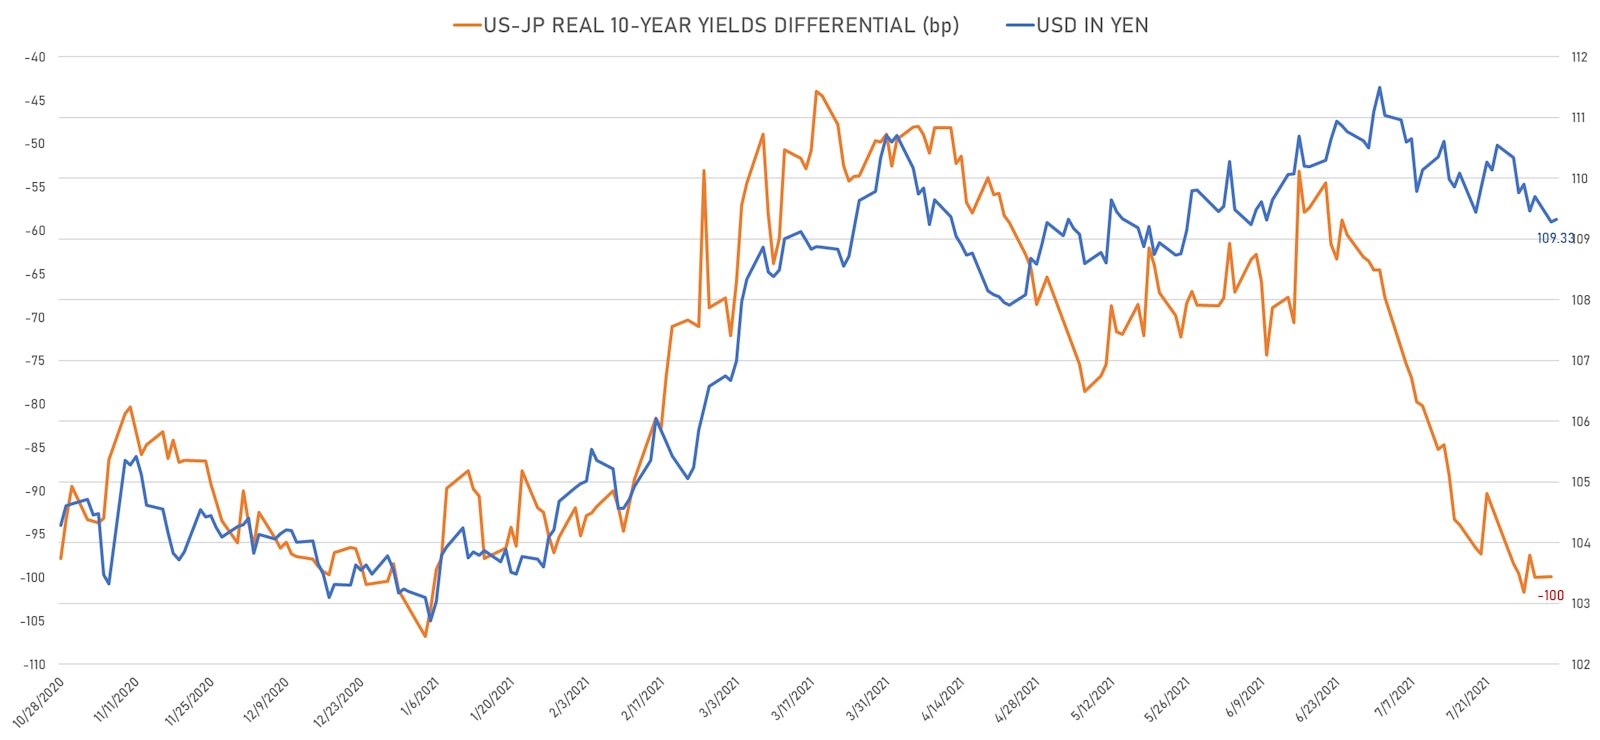 Looking at moves in real rates differentials, the yen still looks undervalued against the dollar | Sources: ϕpost, Refinitiv data